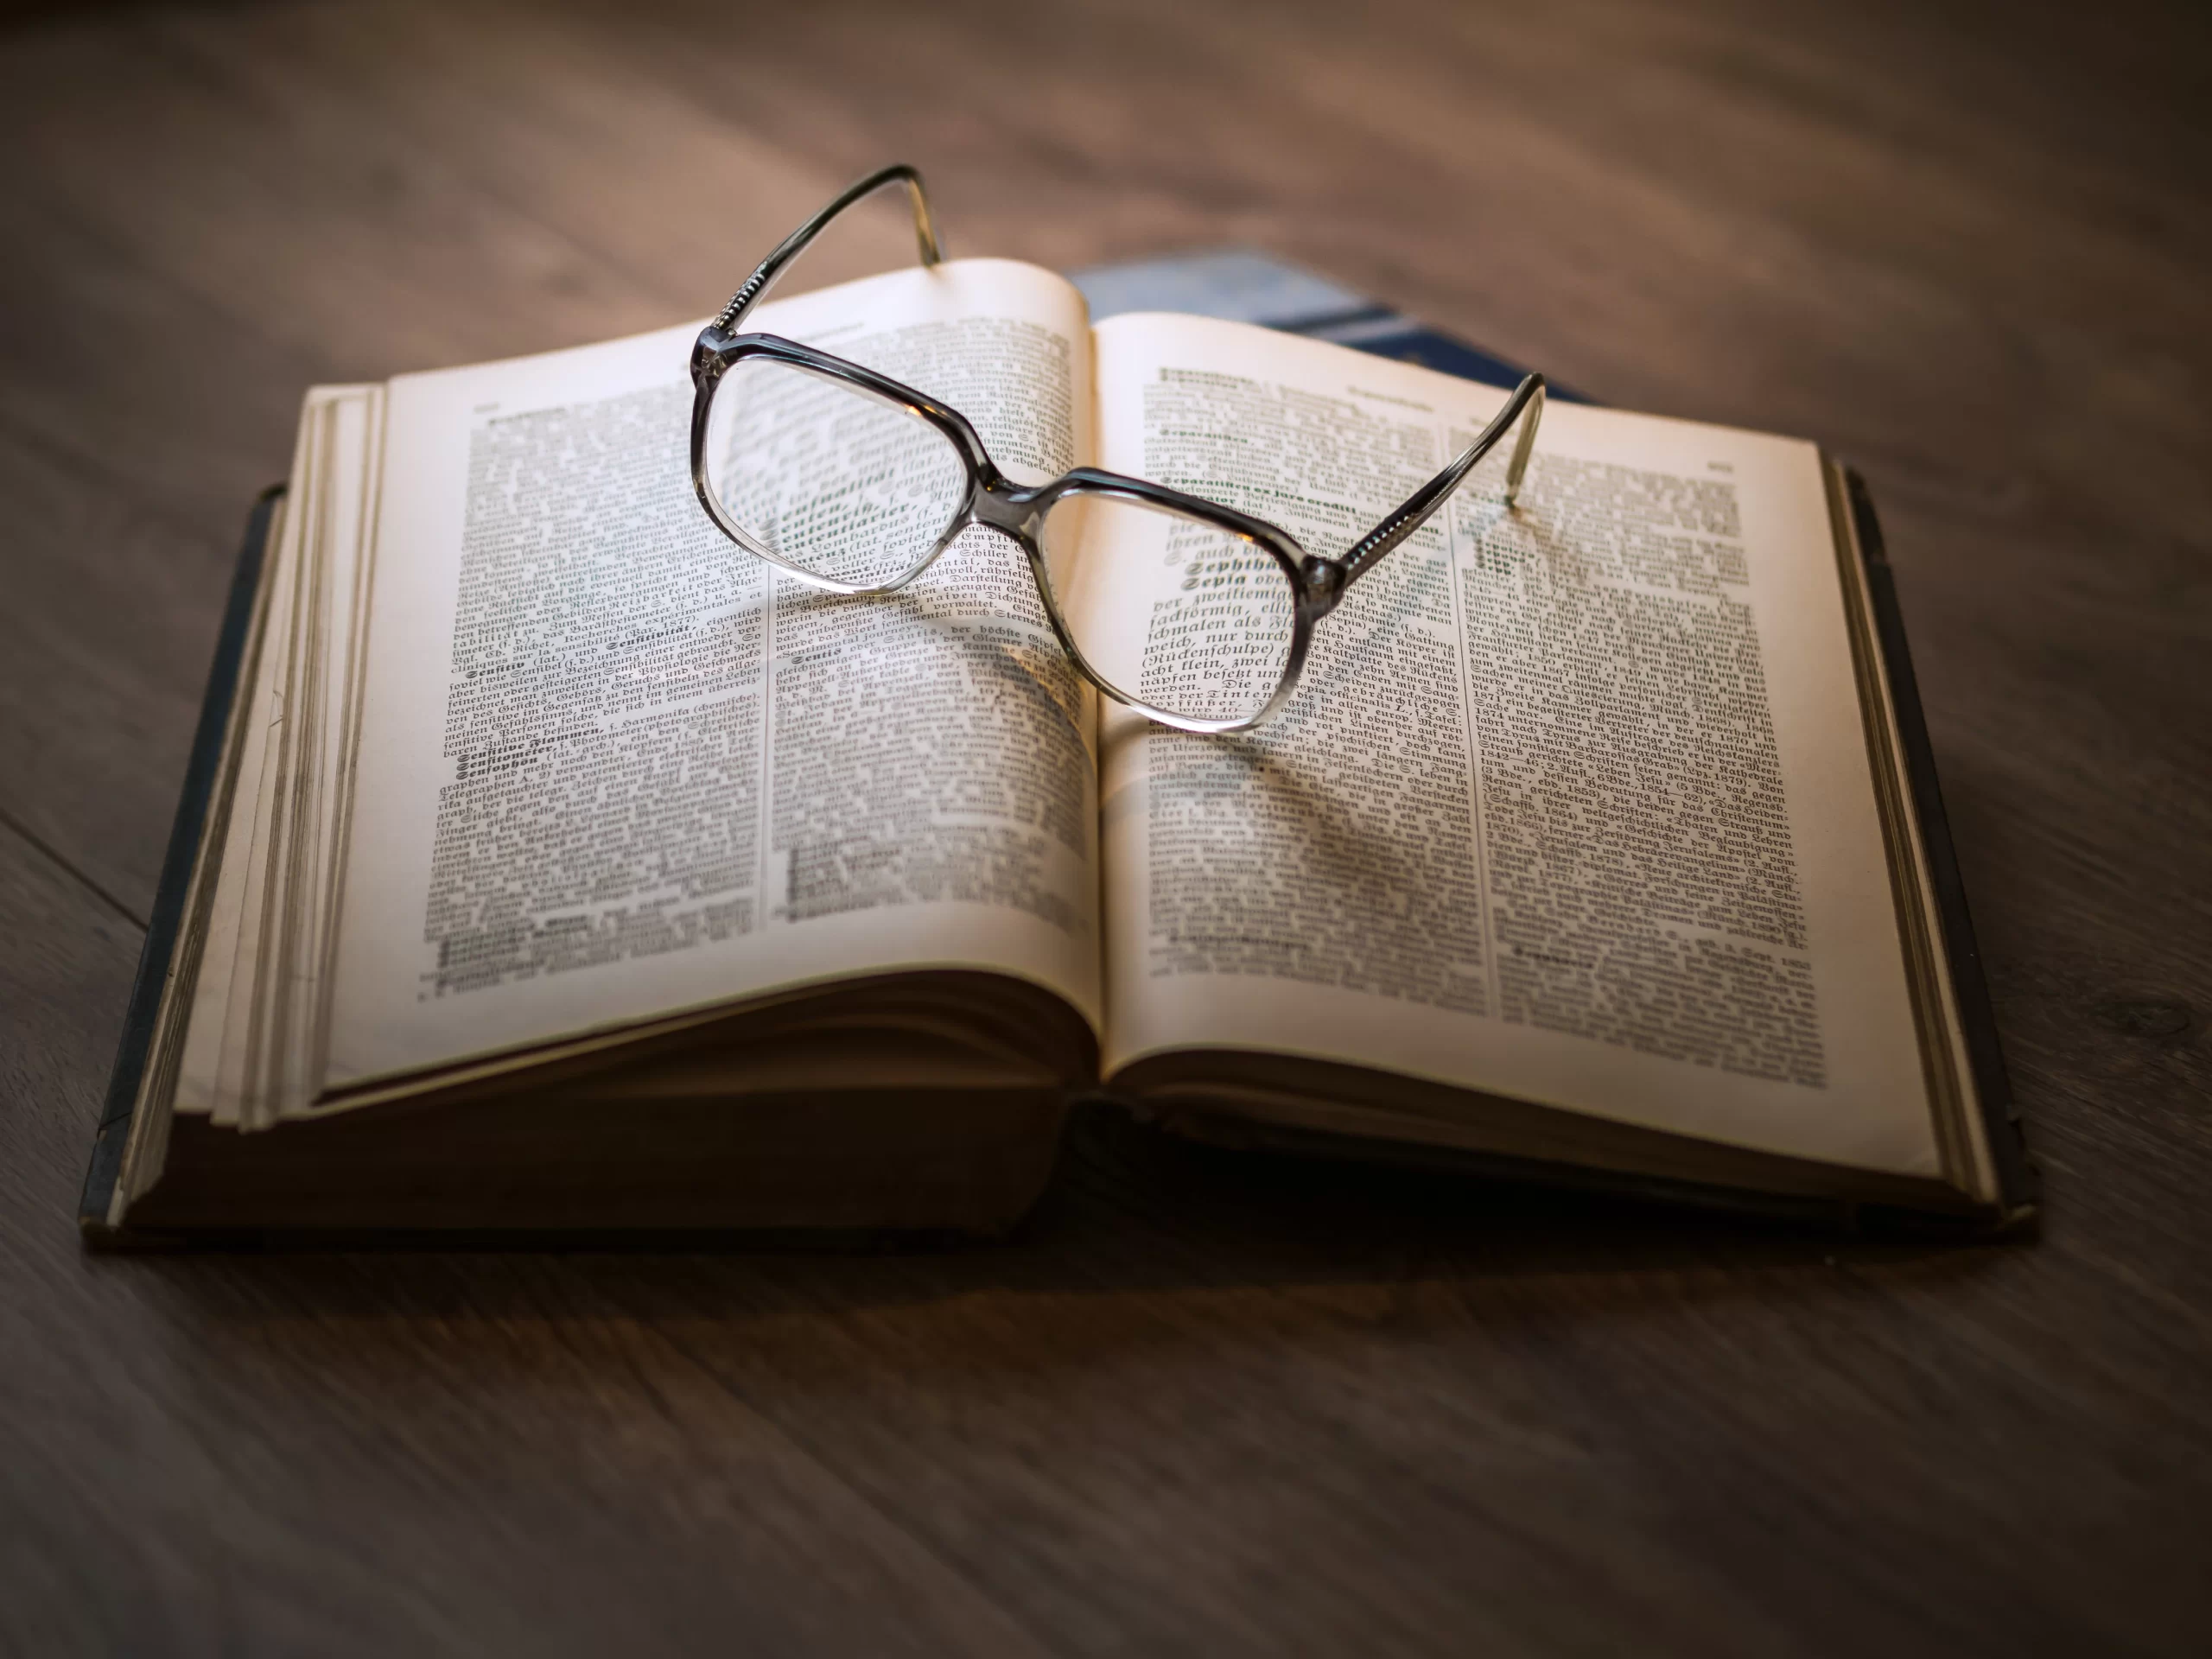 dariusz-sankowski-Law book open with glasses rested upon -unsplash